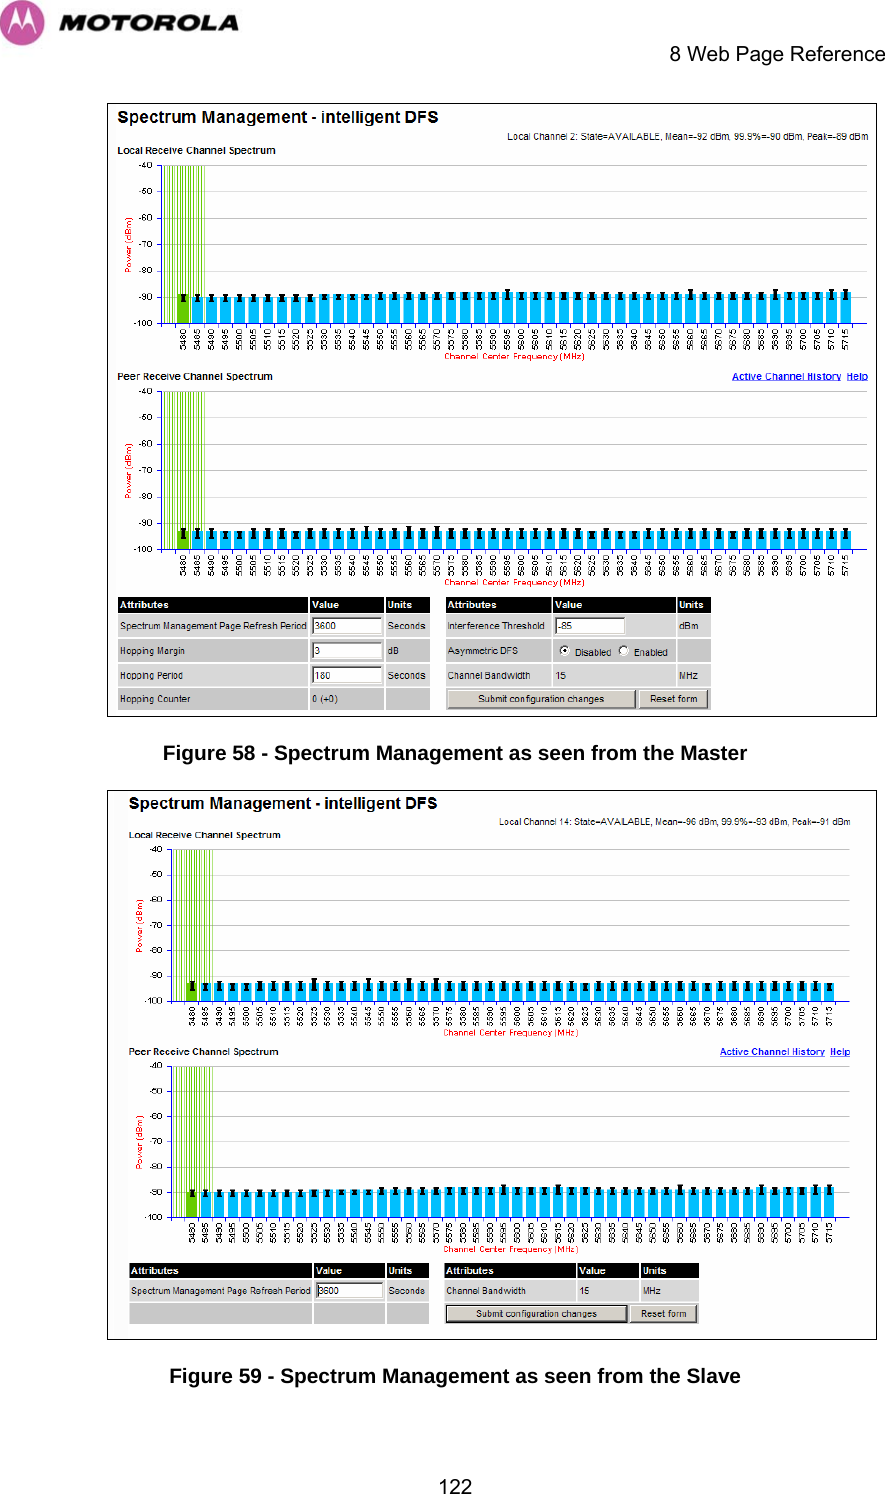     8 Web Page Reference  122 Figure 58 - Spectrum Management as seen from the Master  Figure 59 - Spectrum Management as seen from the Slave 